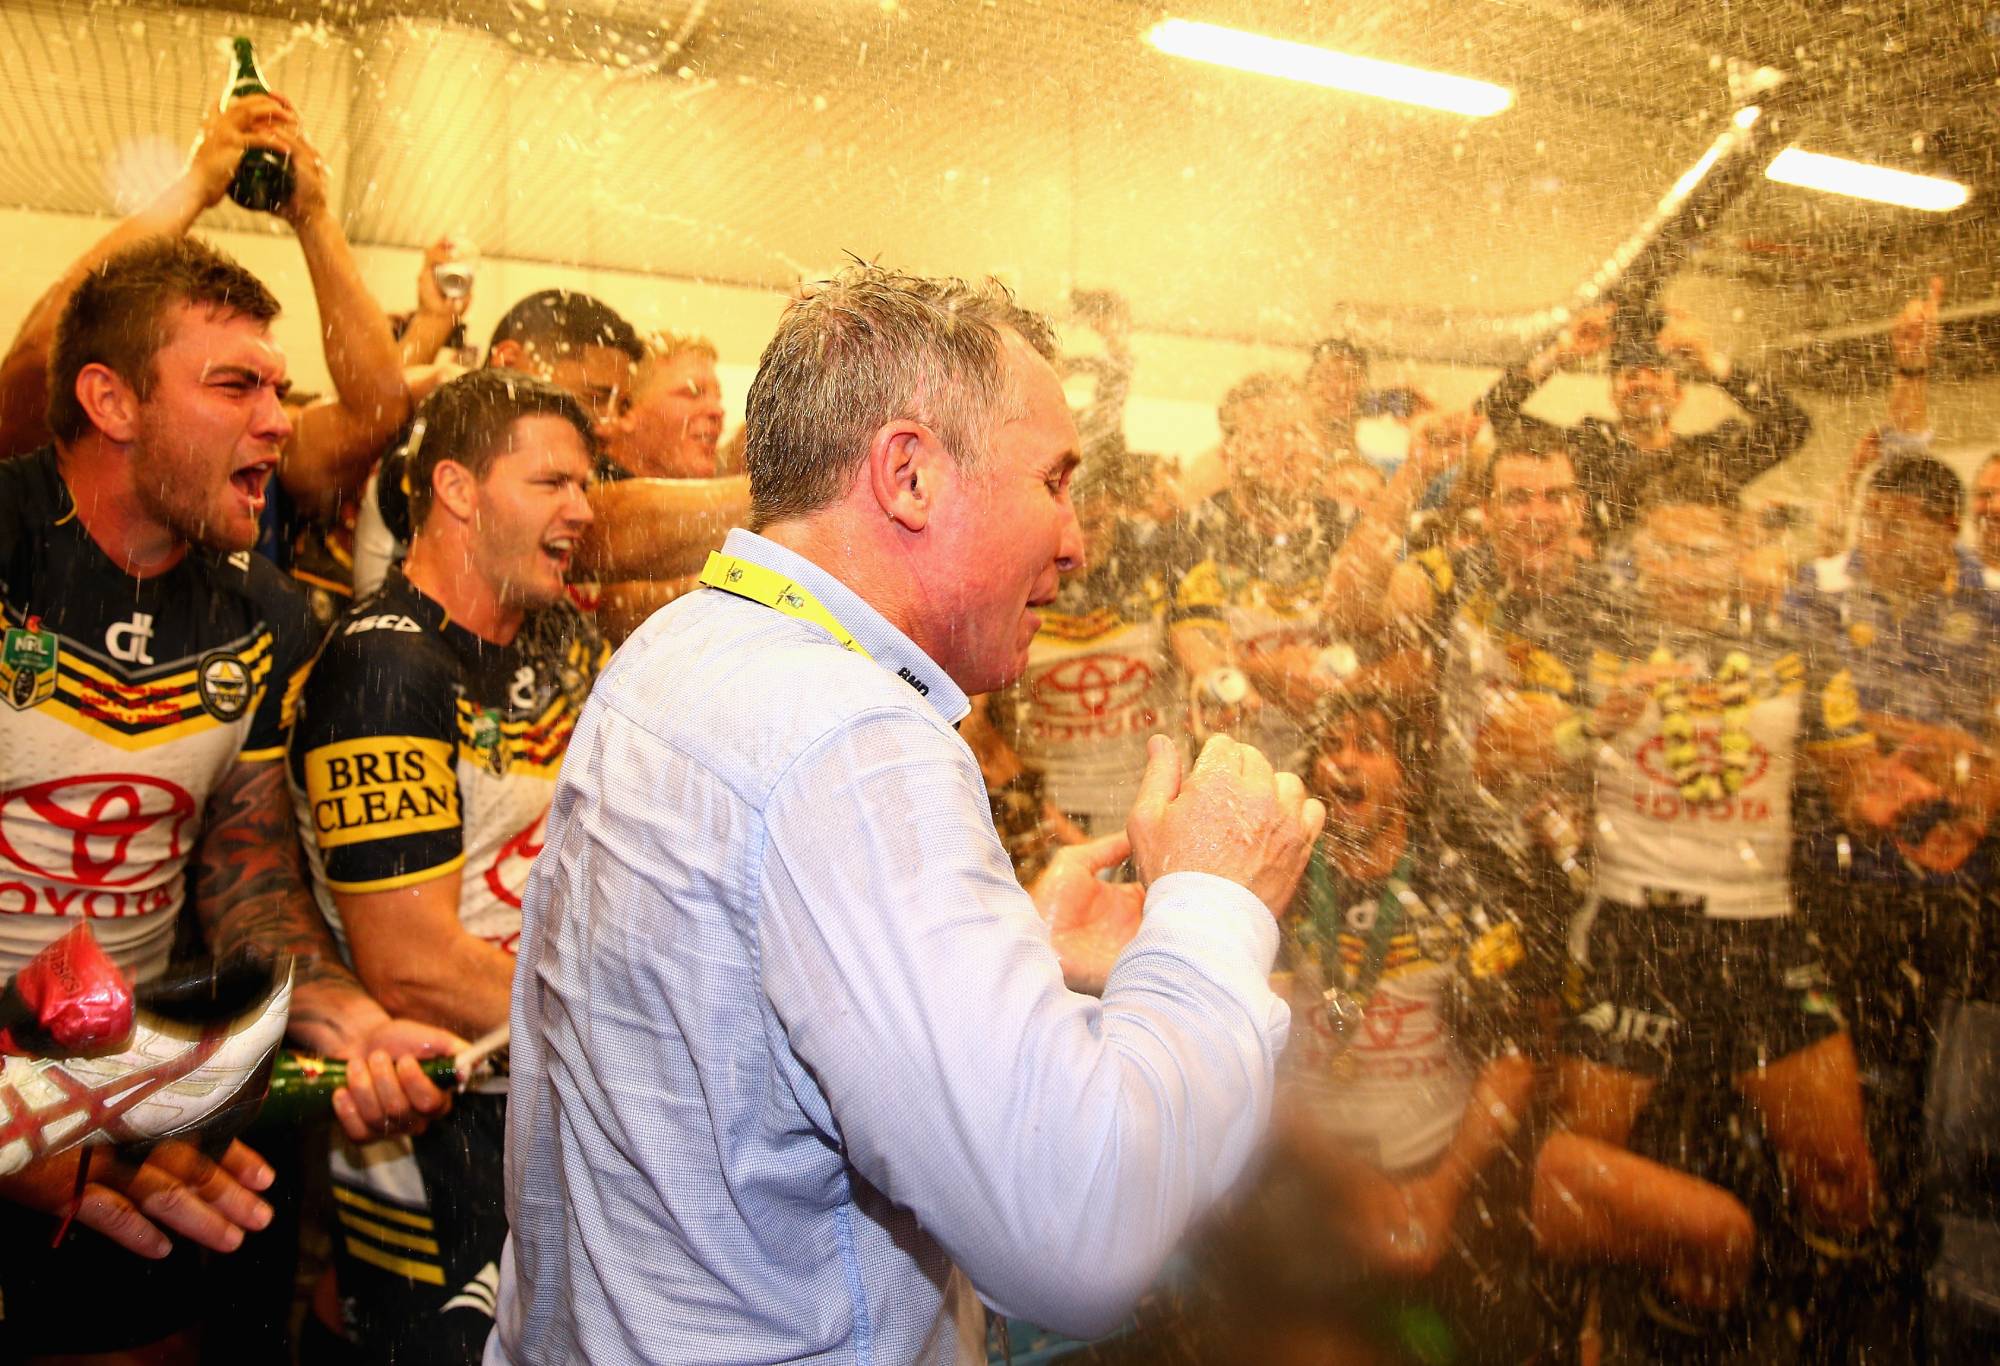 SYDNEY, AUSTRALIA - OCTOBER 04: Cowboys coach Paul Green is sprayed by his players with champagne after winning the 2015 NRL Grand Final match between the Brisbane Broncos and the North Queensland Cowboys at ANZ Stadium on October 4, 2015 in Sydney, Australia. (Photo by Cameron Spencer/Getty Images)